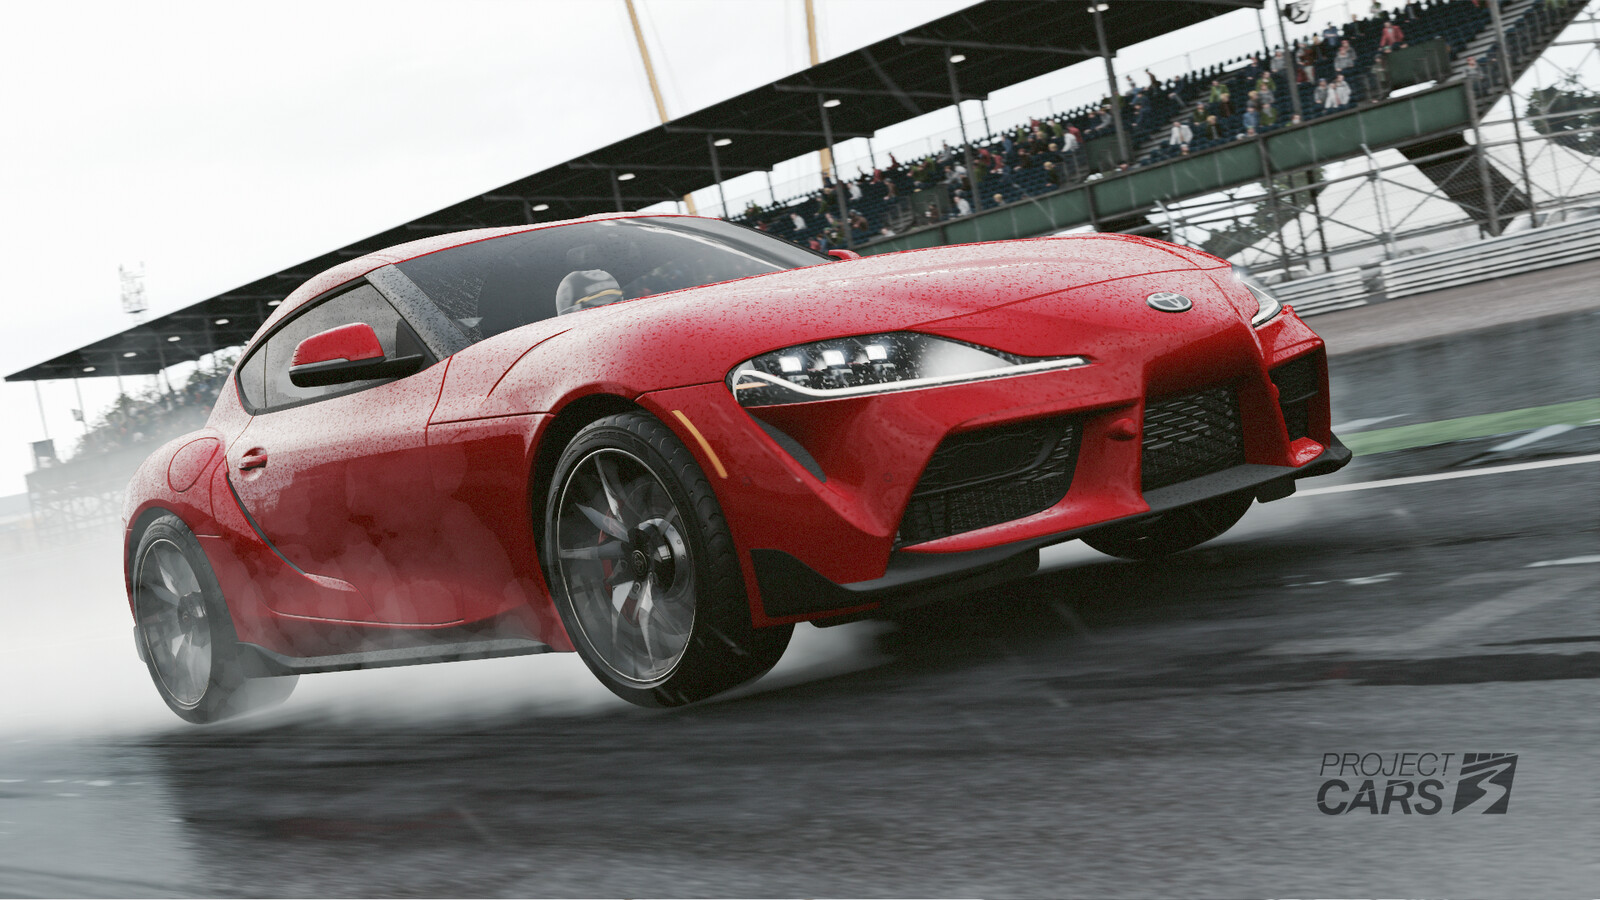 2019 Toyota Supra in Project CARS 3